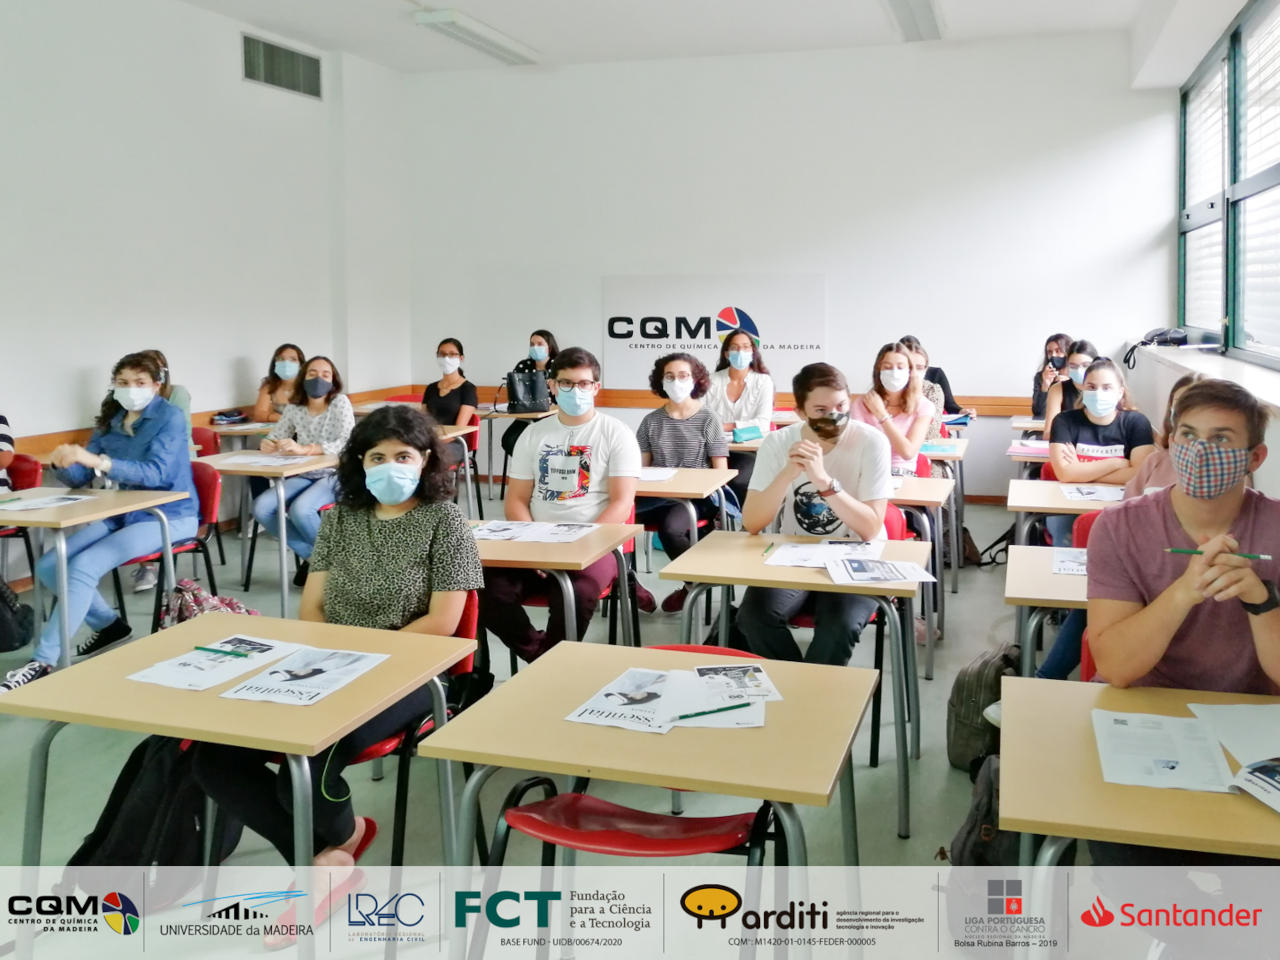 Madeira Chemistry Research Centre (CQM *) welcomes the students of 1st cycle in Biochemistry